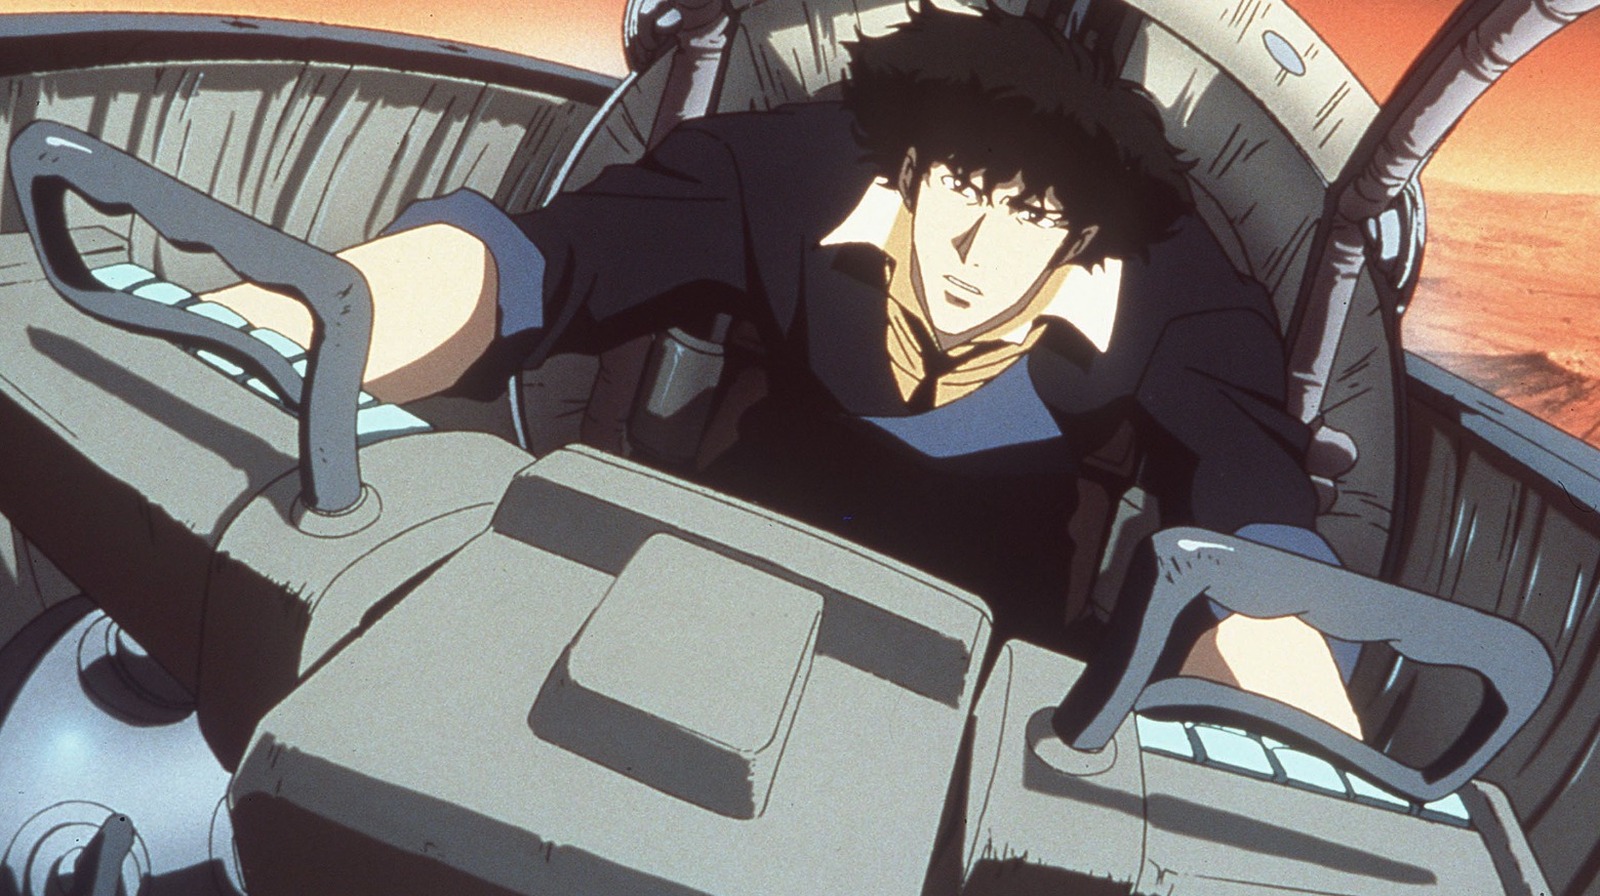 The Original Plan For Cowboy Bebop Was Nothing More Than A Cash Grab